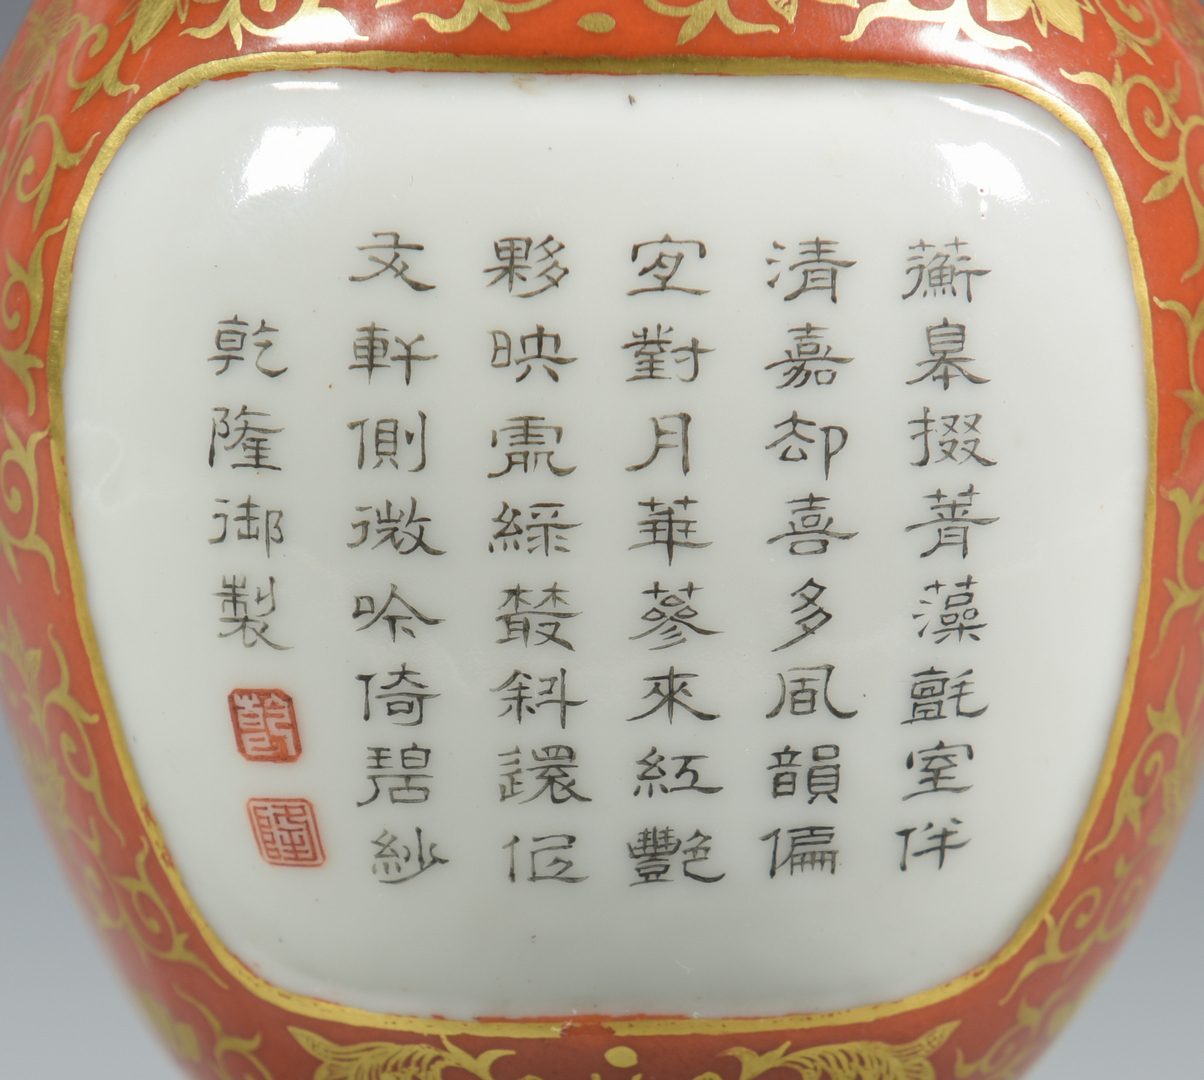 Lot 21: Pr. Chinese Porcelain Wall Pockets